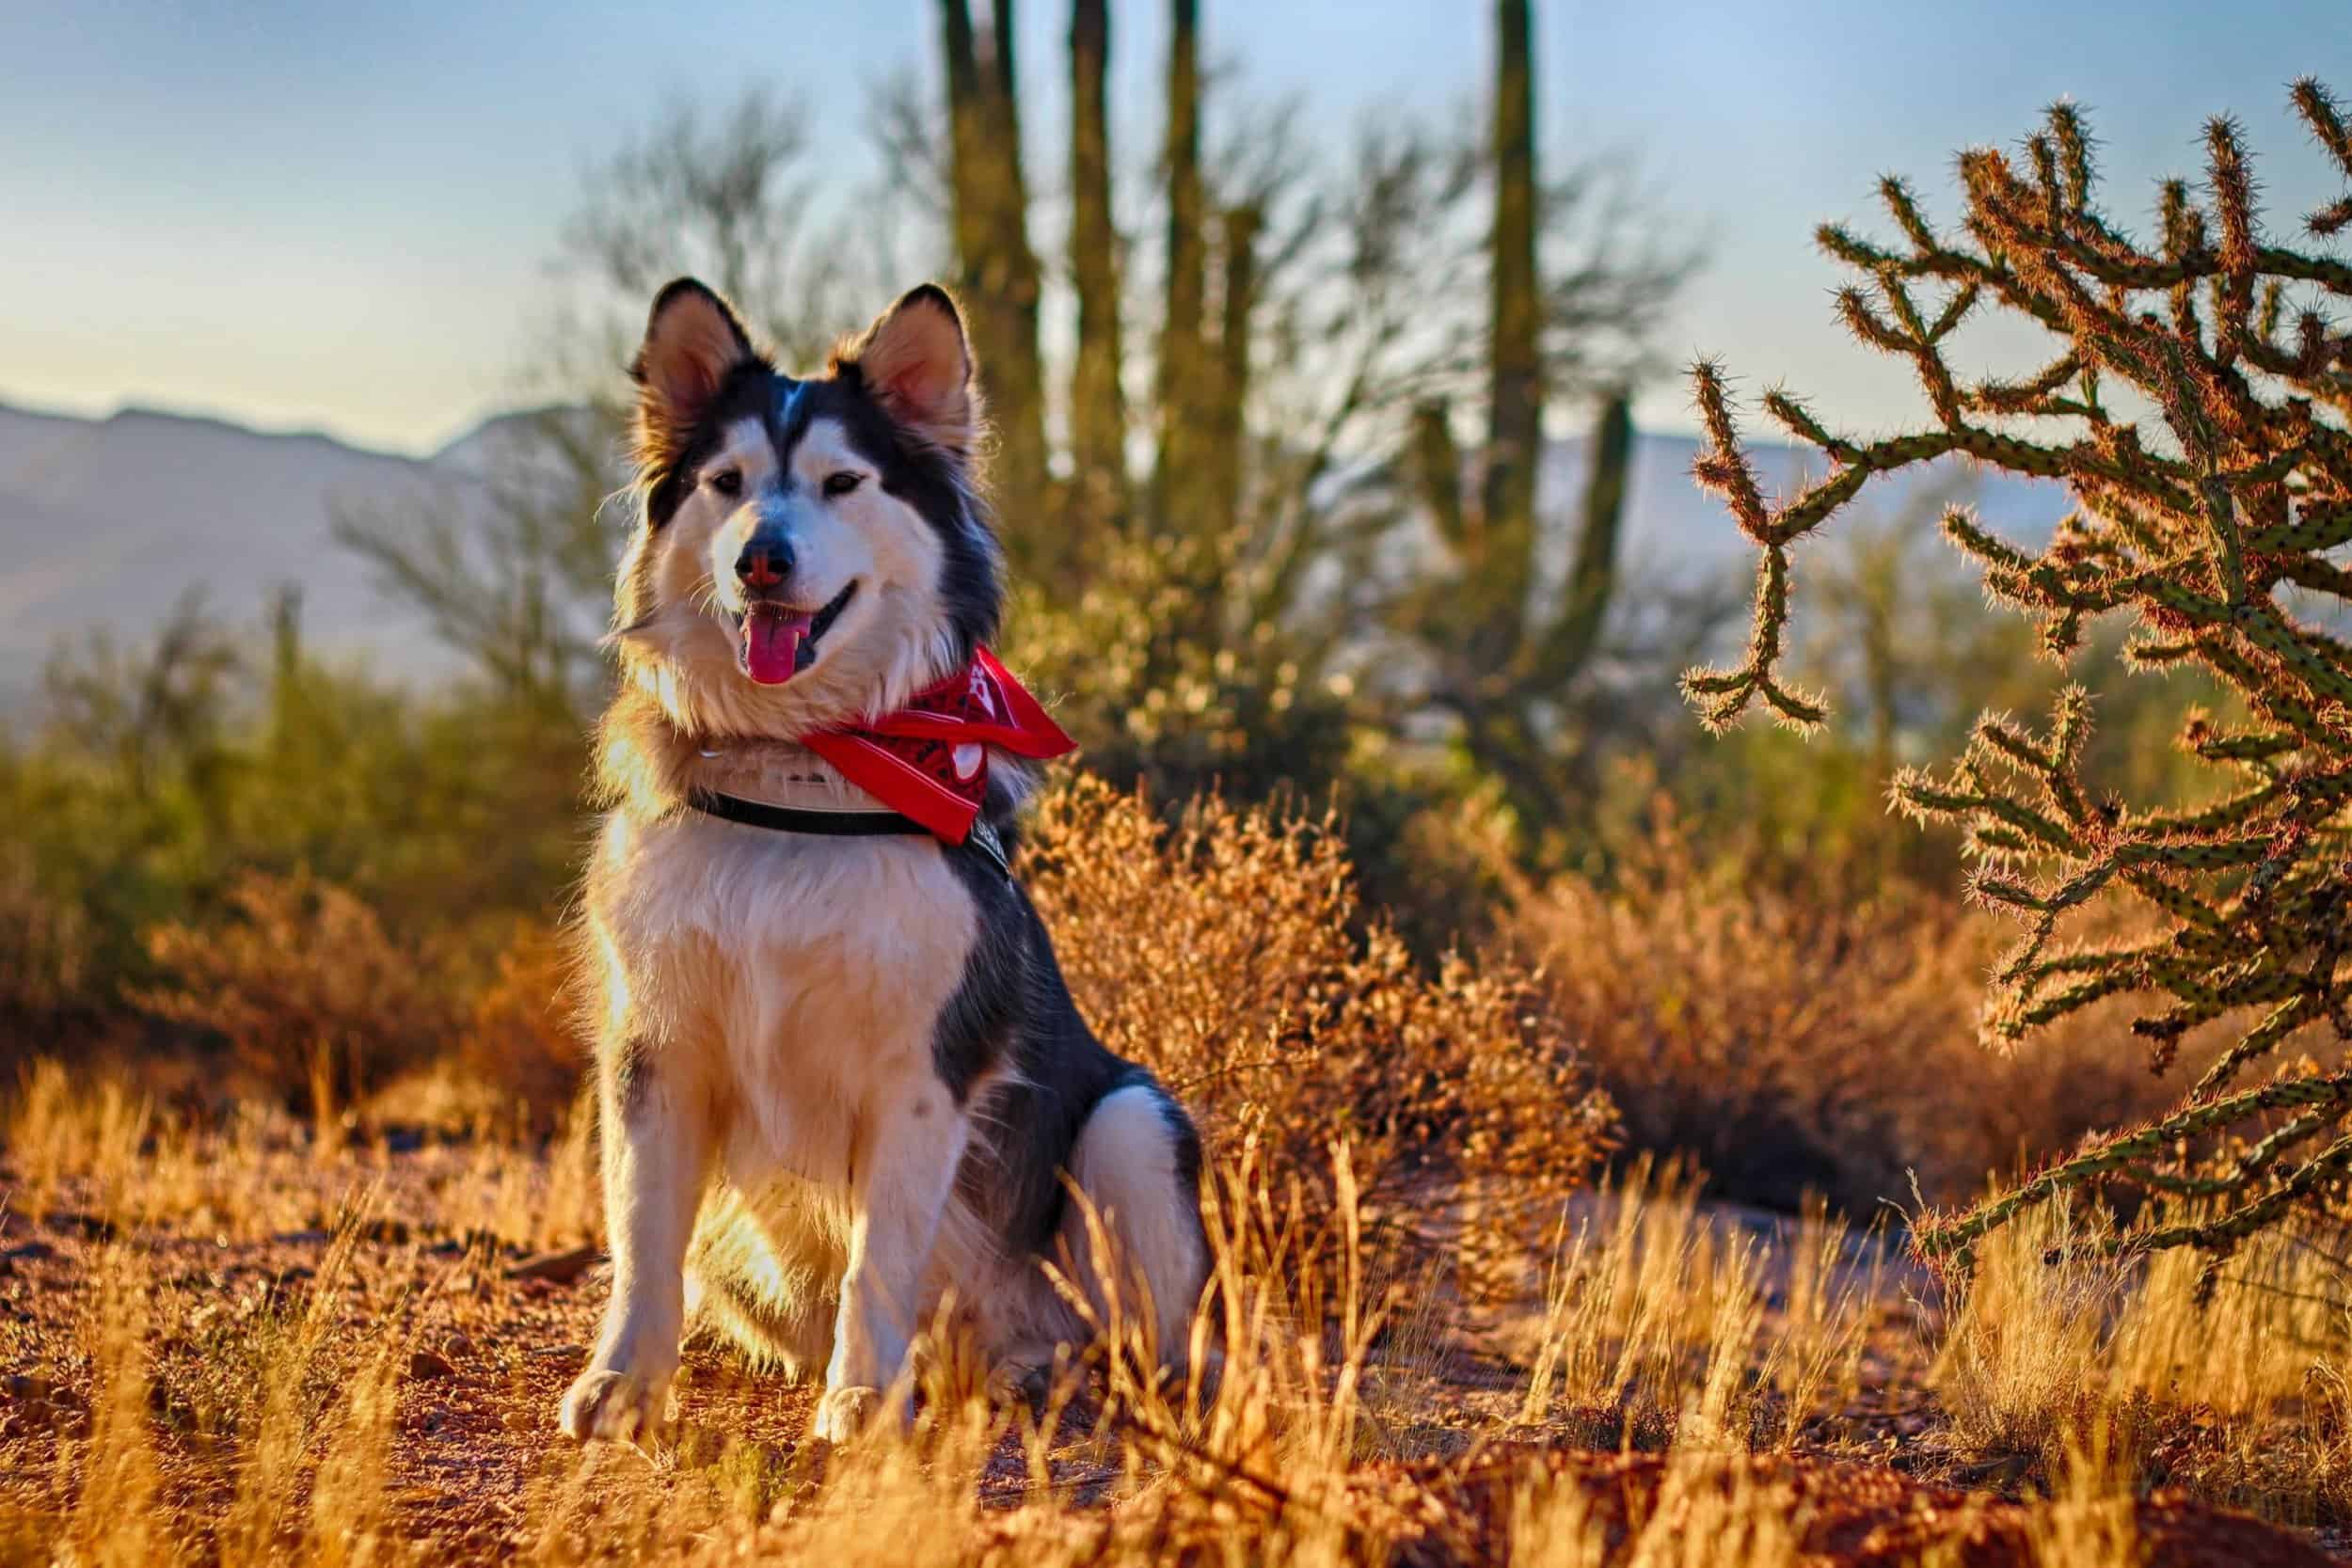 husky dog sits in desert with cacti in background